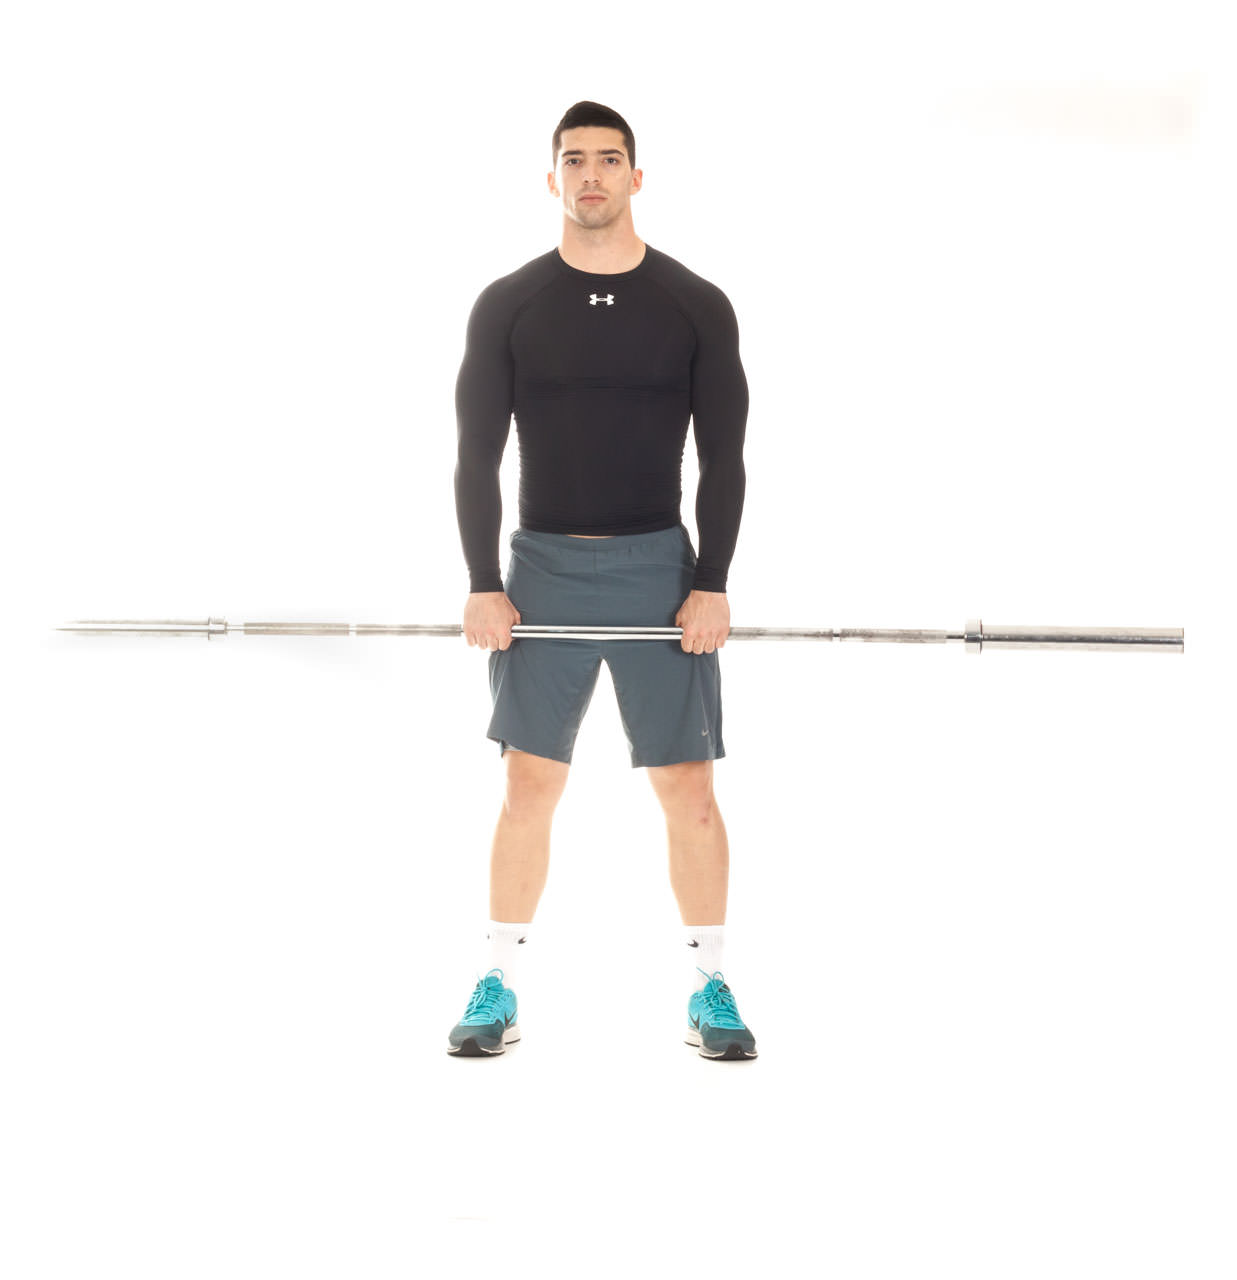 Upright Barbell Row frame #1